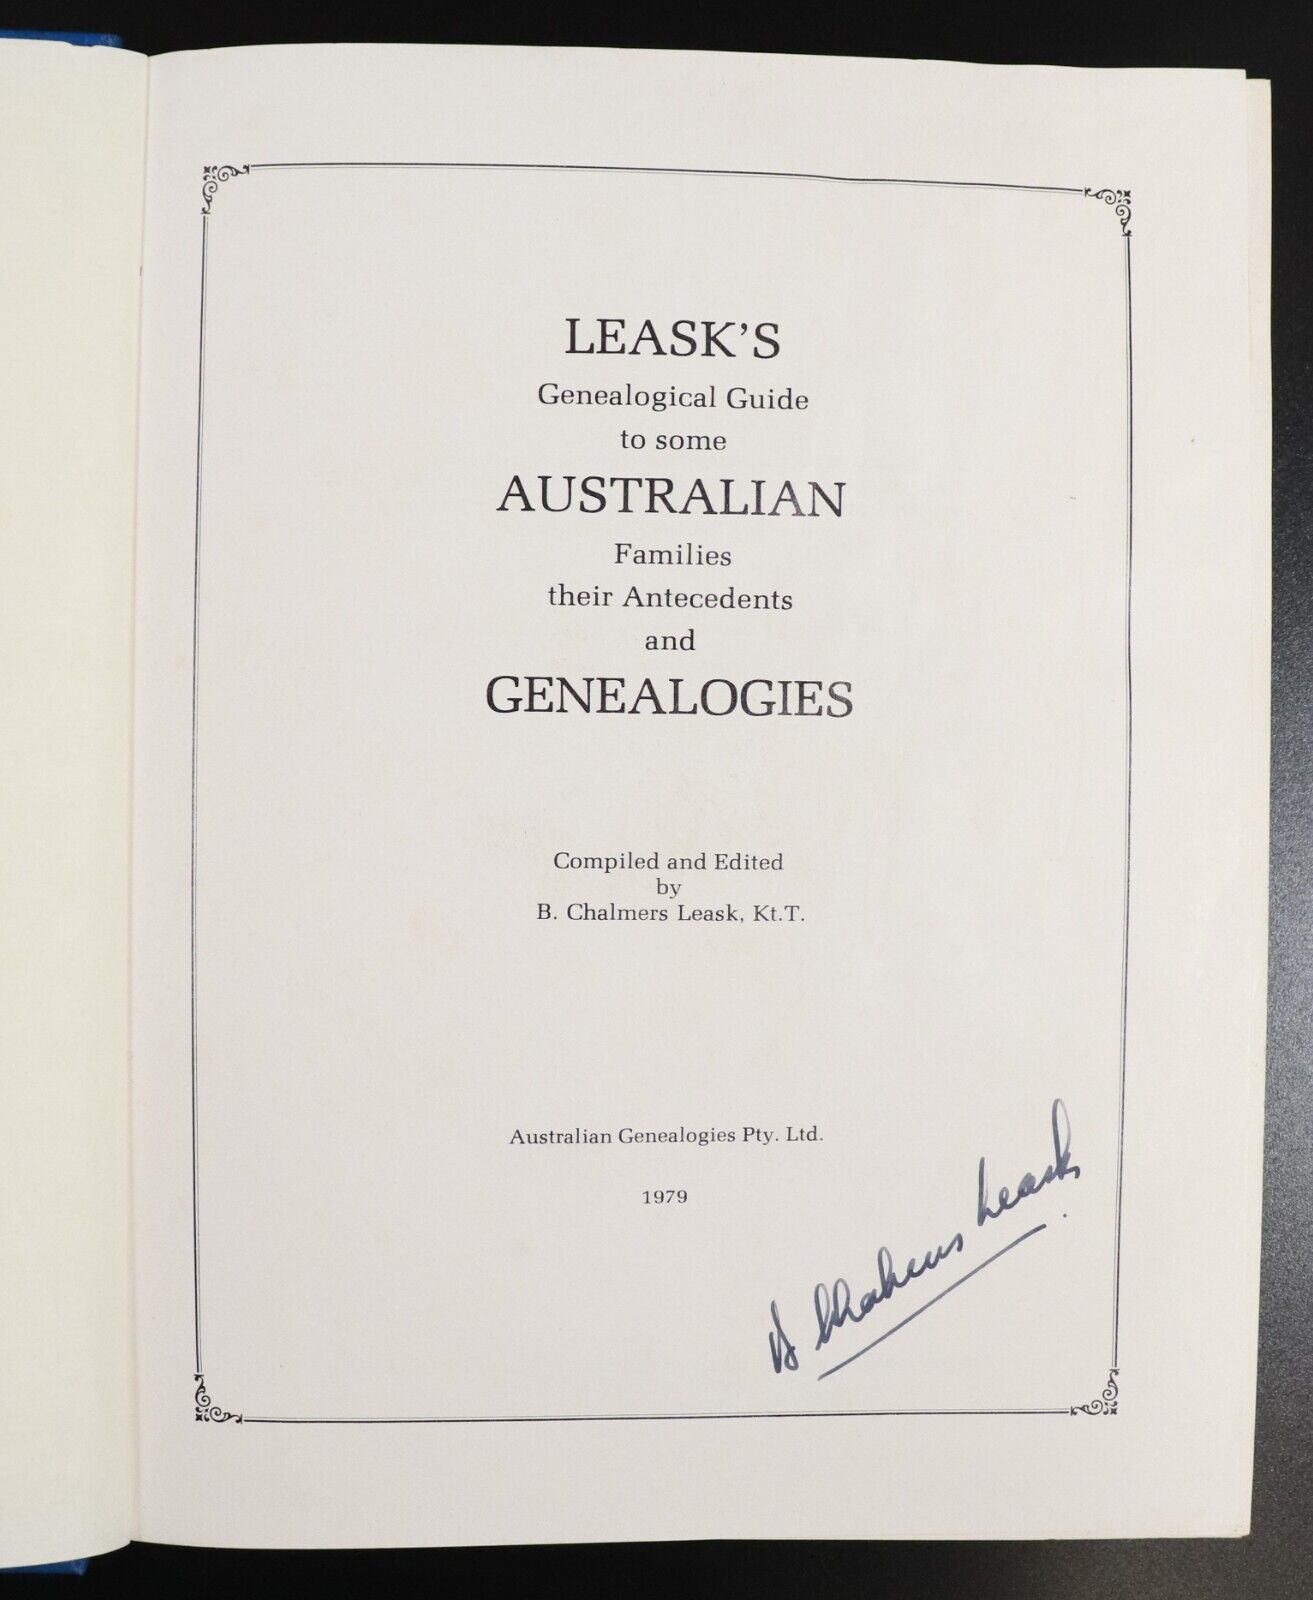 1979 Leask's Genealogical Guide To Australian Families Genealogy Reference Book - 0